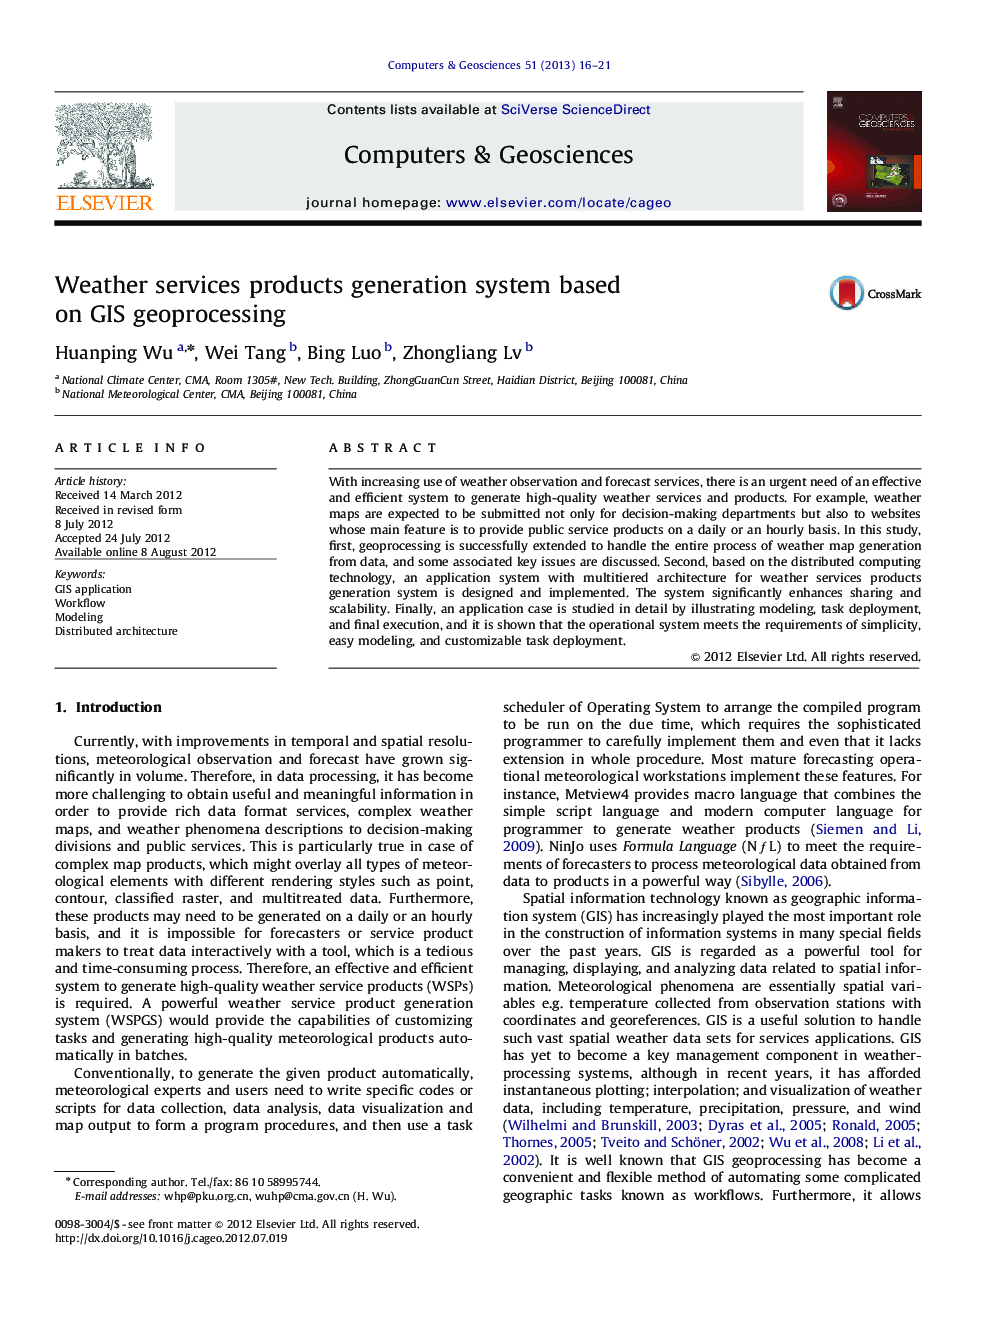 Weather services products generation system based on GIS geoprocessing